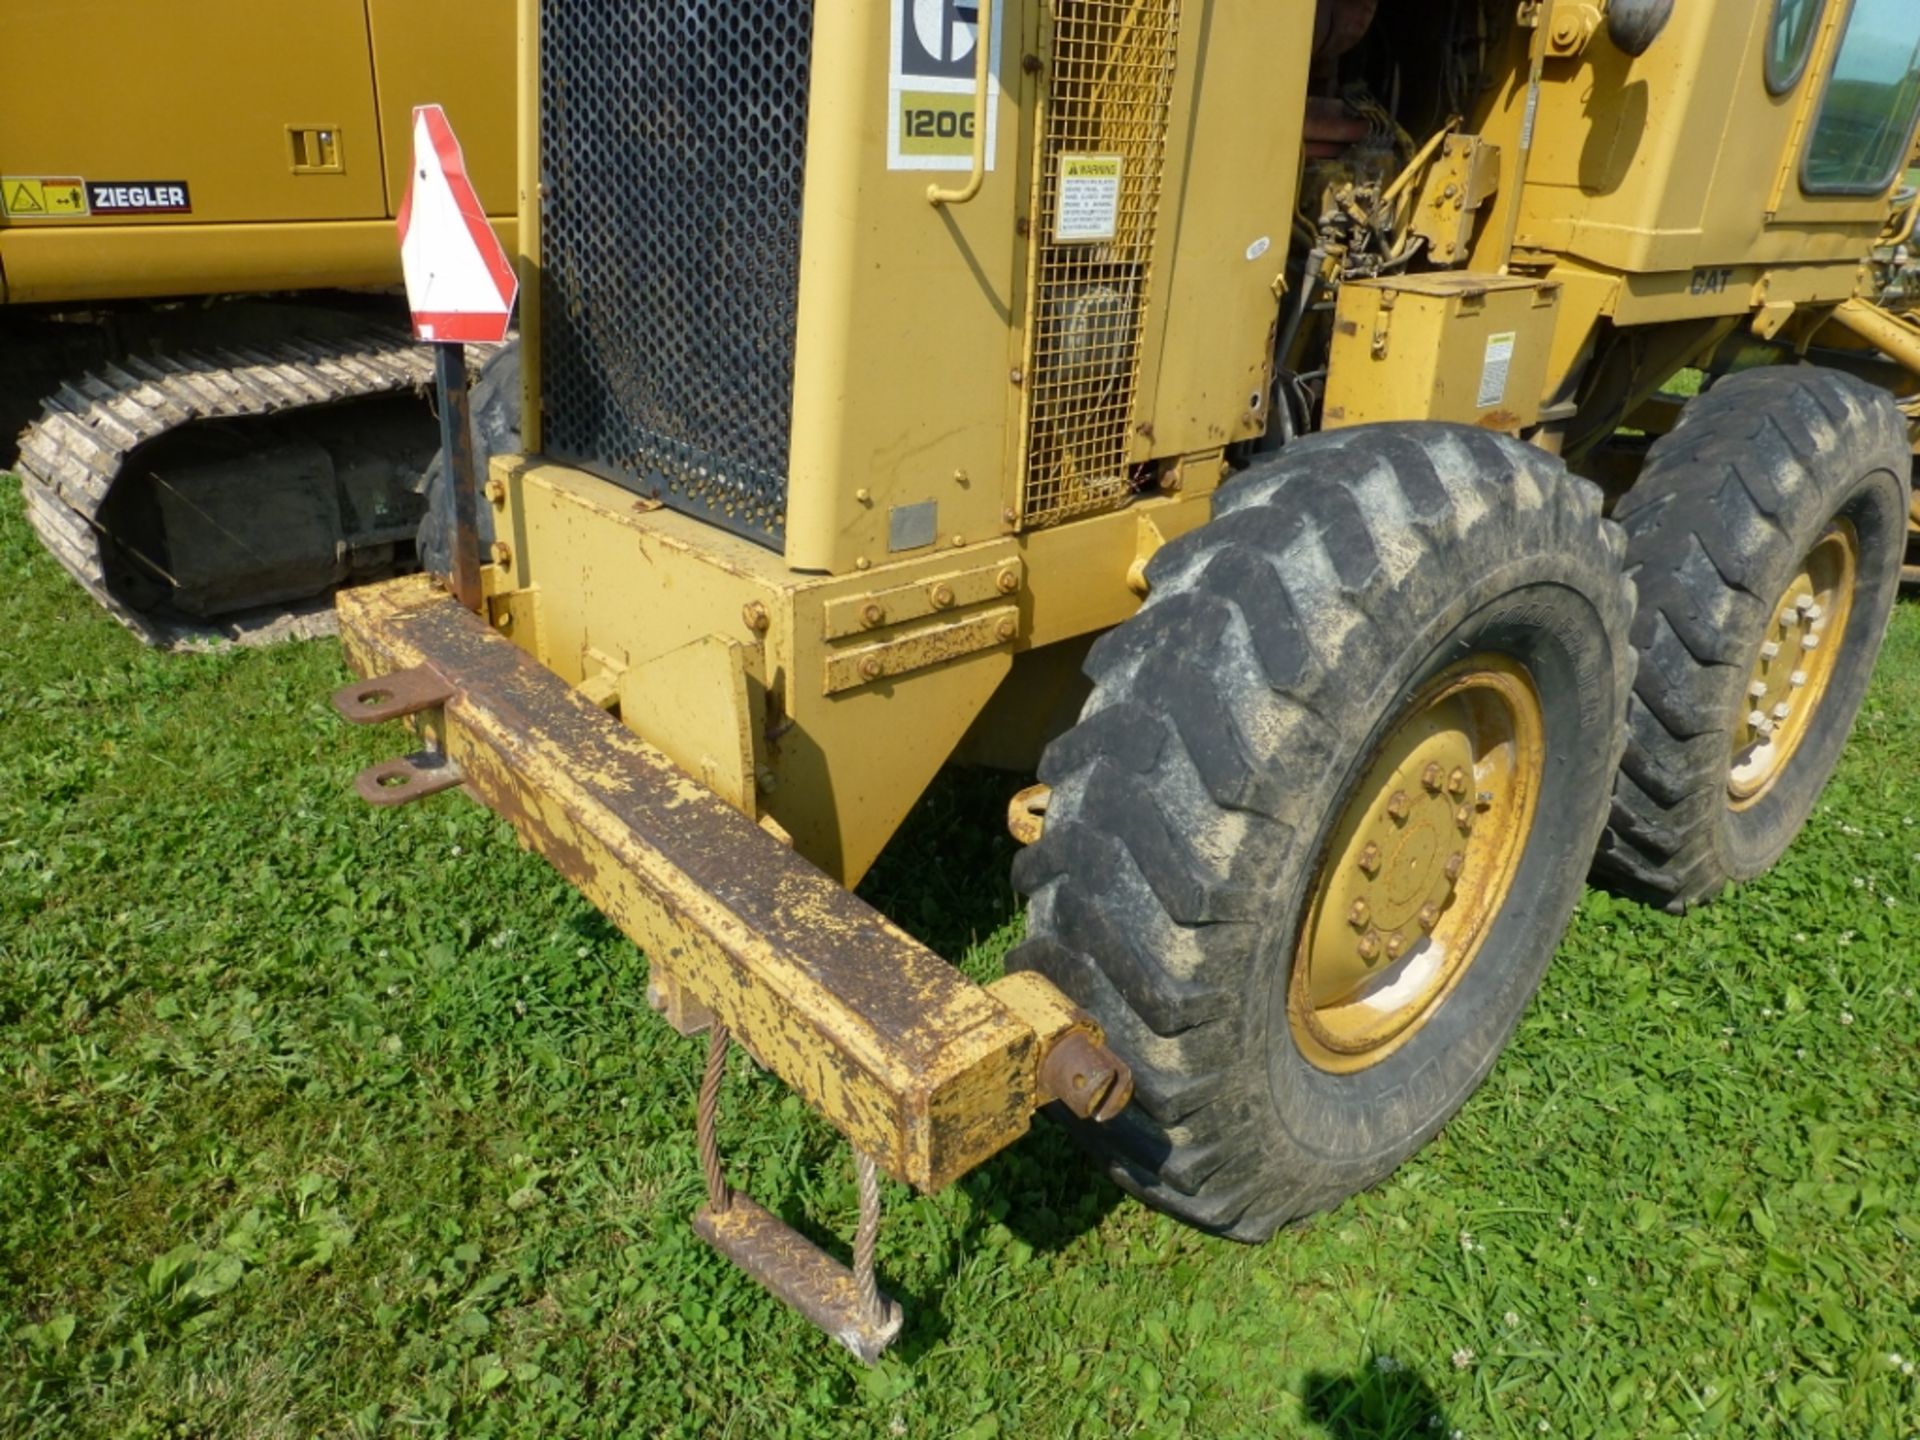 Caterpillar 120G motor grader with 13'10" moldboard se:87v871. Power shift. 7720 unverified hrs. - Image 23 of 27